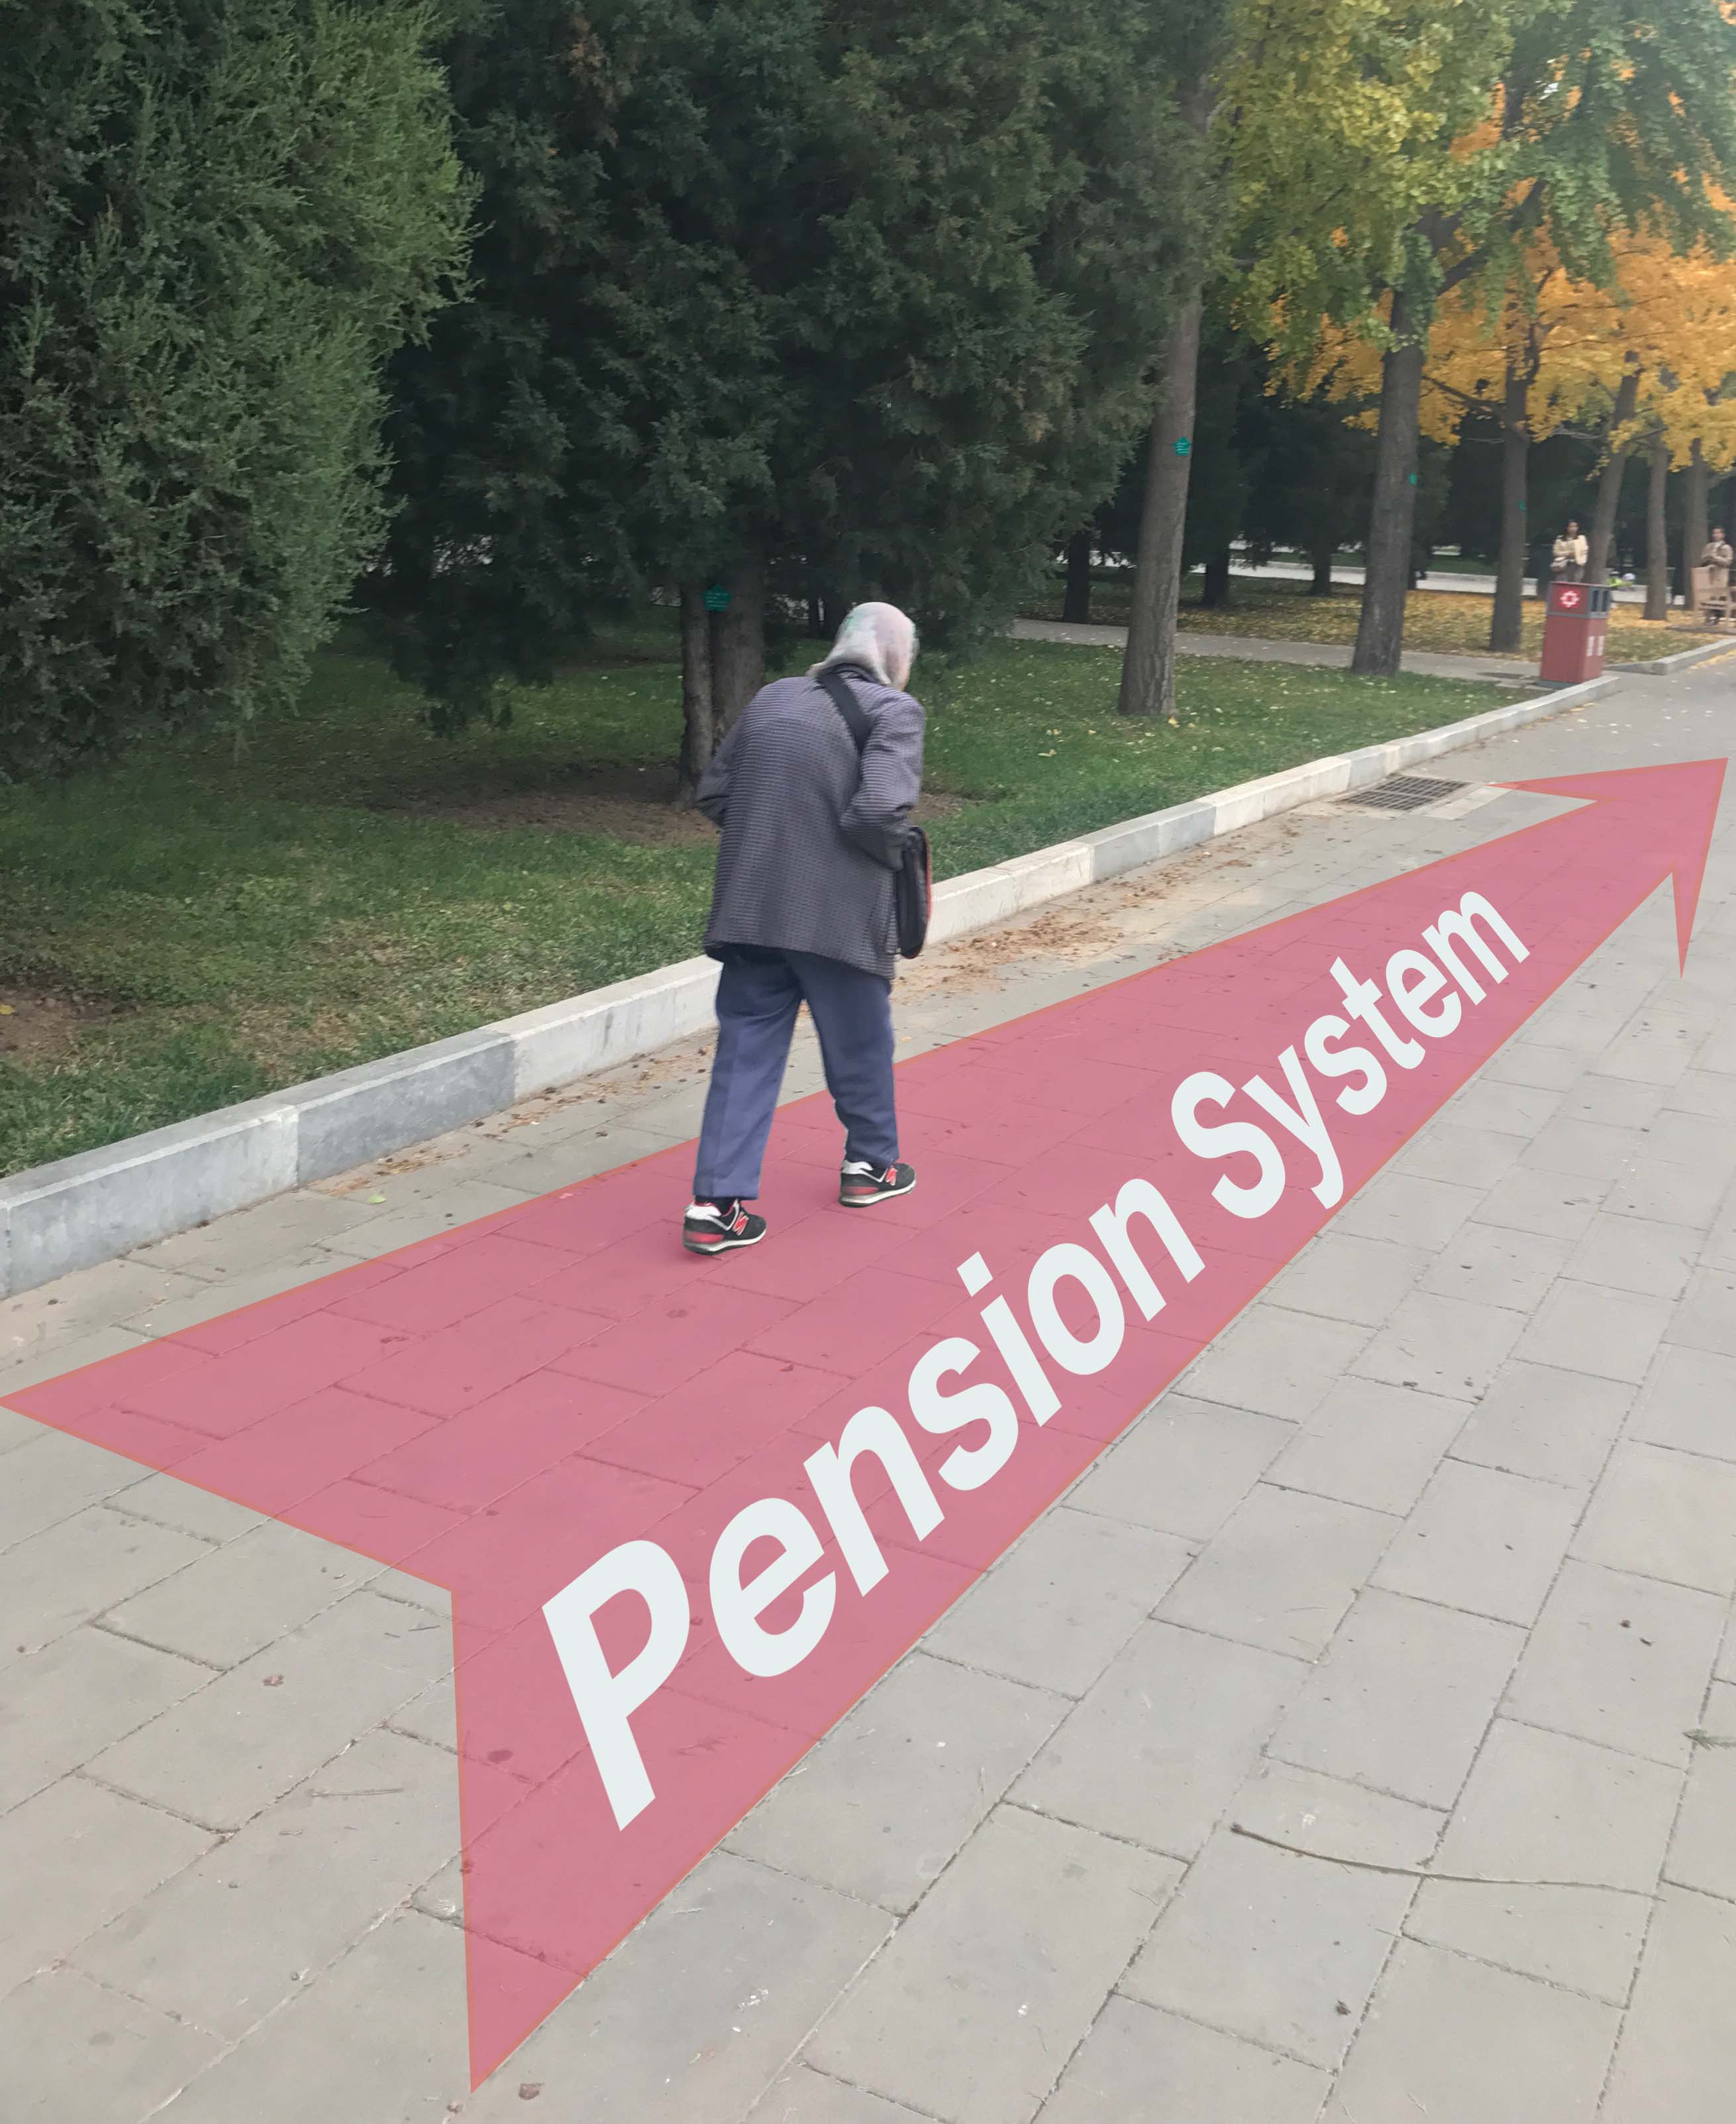 Develop Commercial Pension Insurance and Improve the Pension System